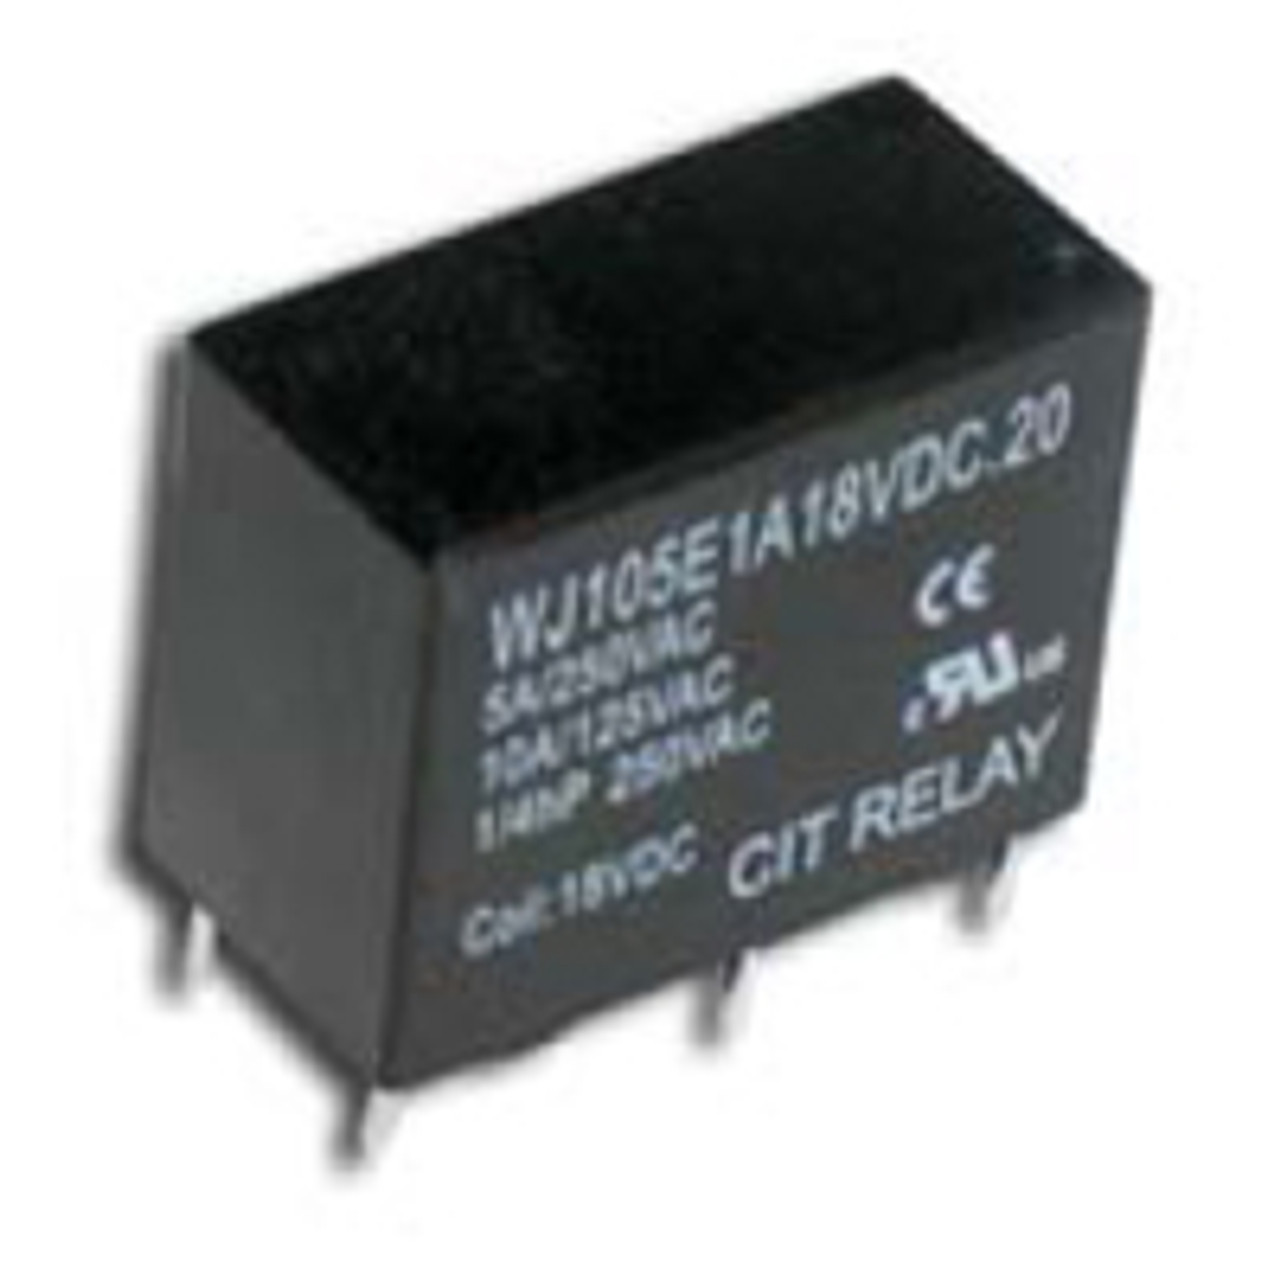 CIT Relay and Switch J105E1A24VDC.20 General Purpose Relays